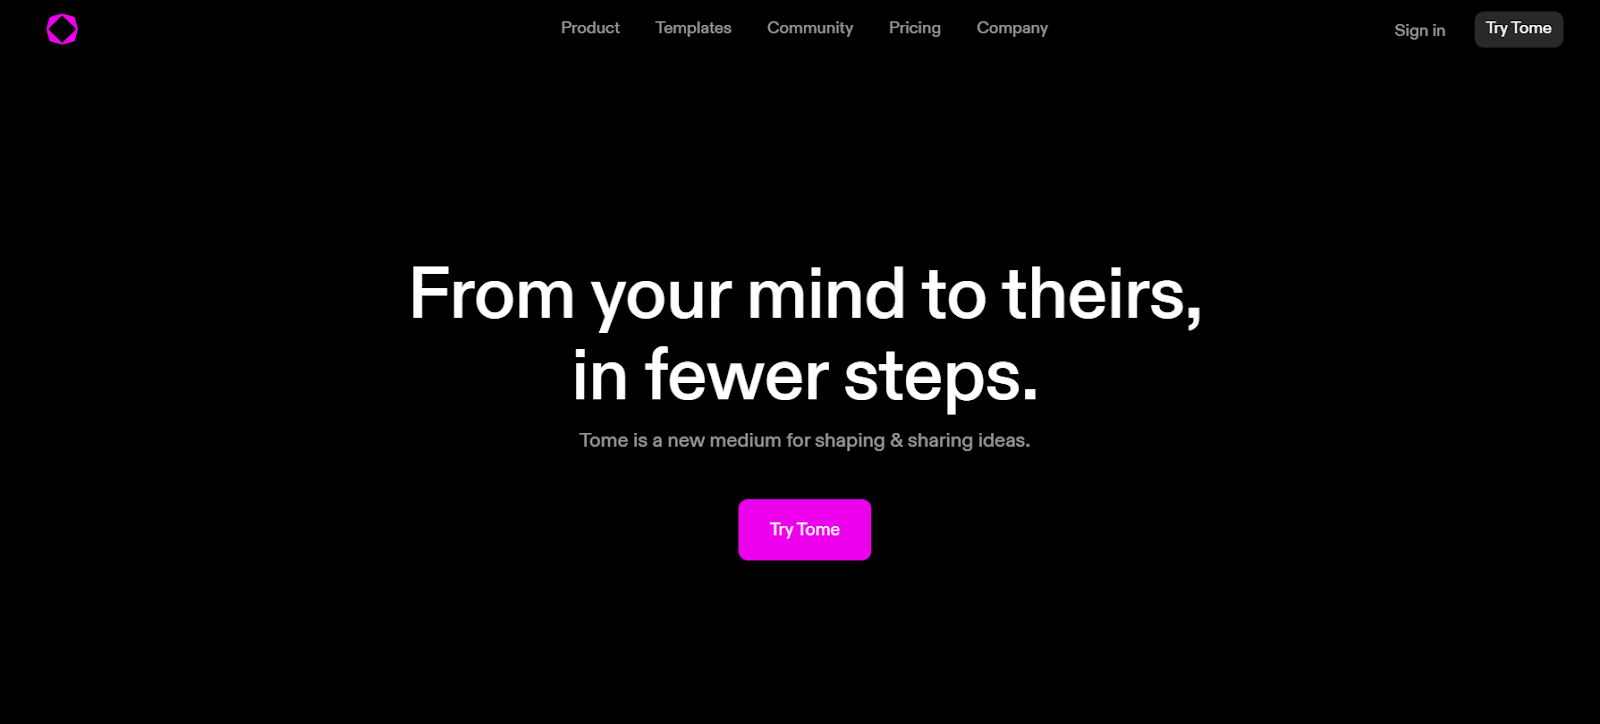 tome website - from your mind to theirs, in fewer steps